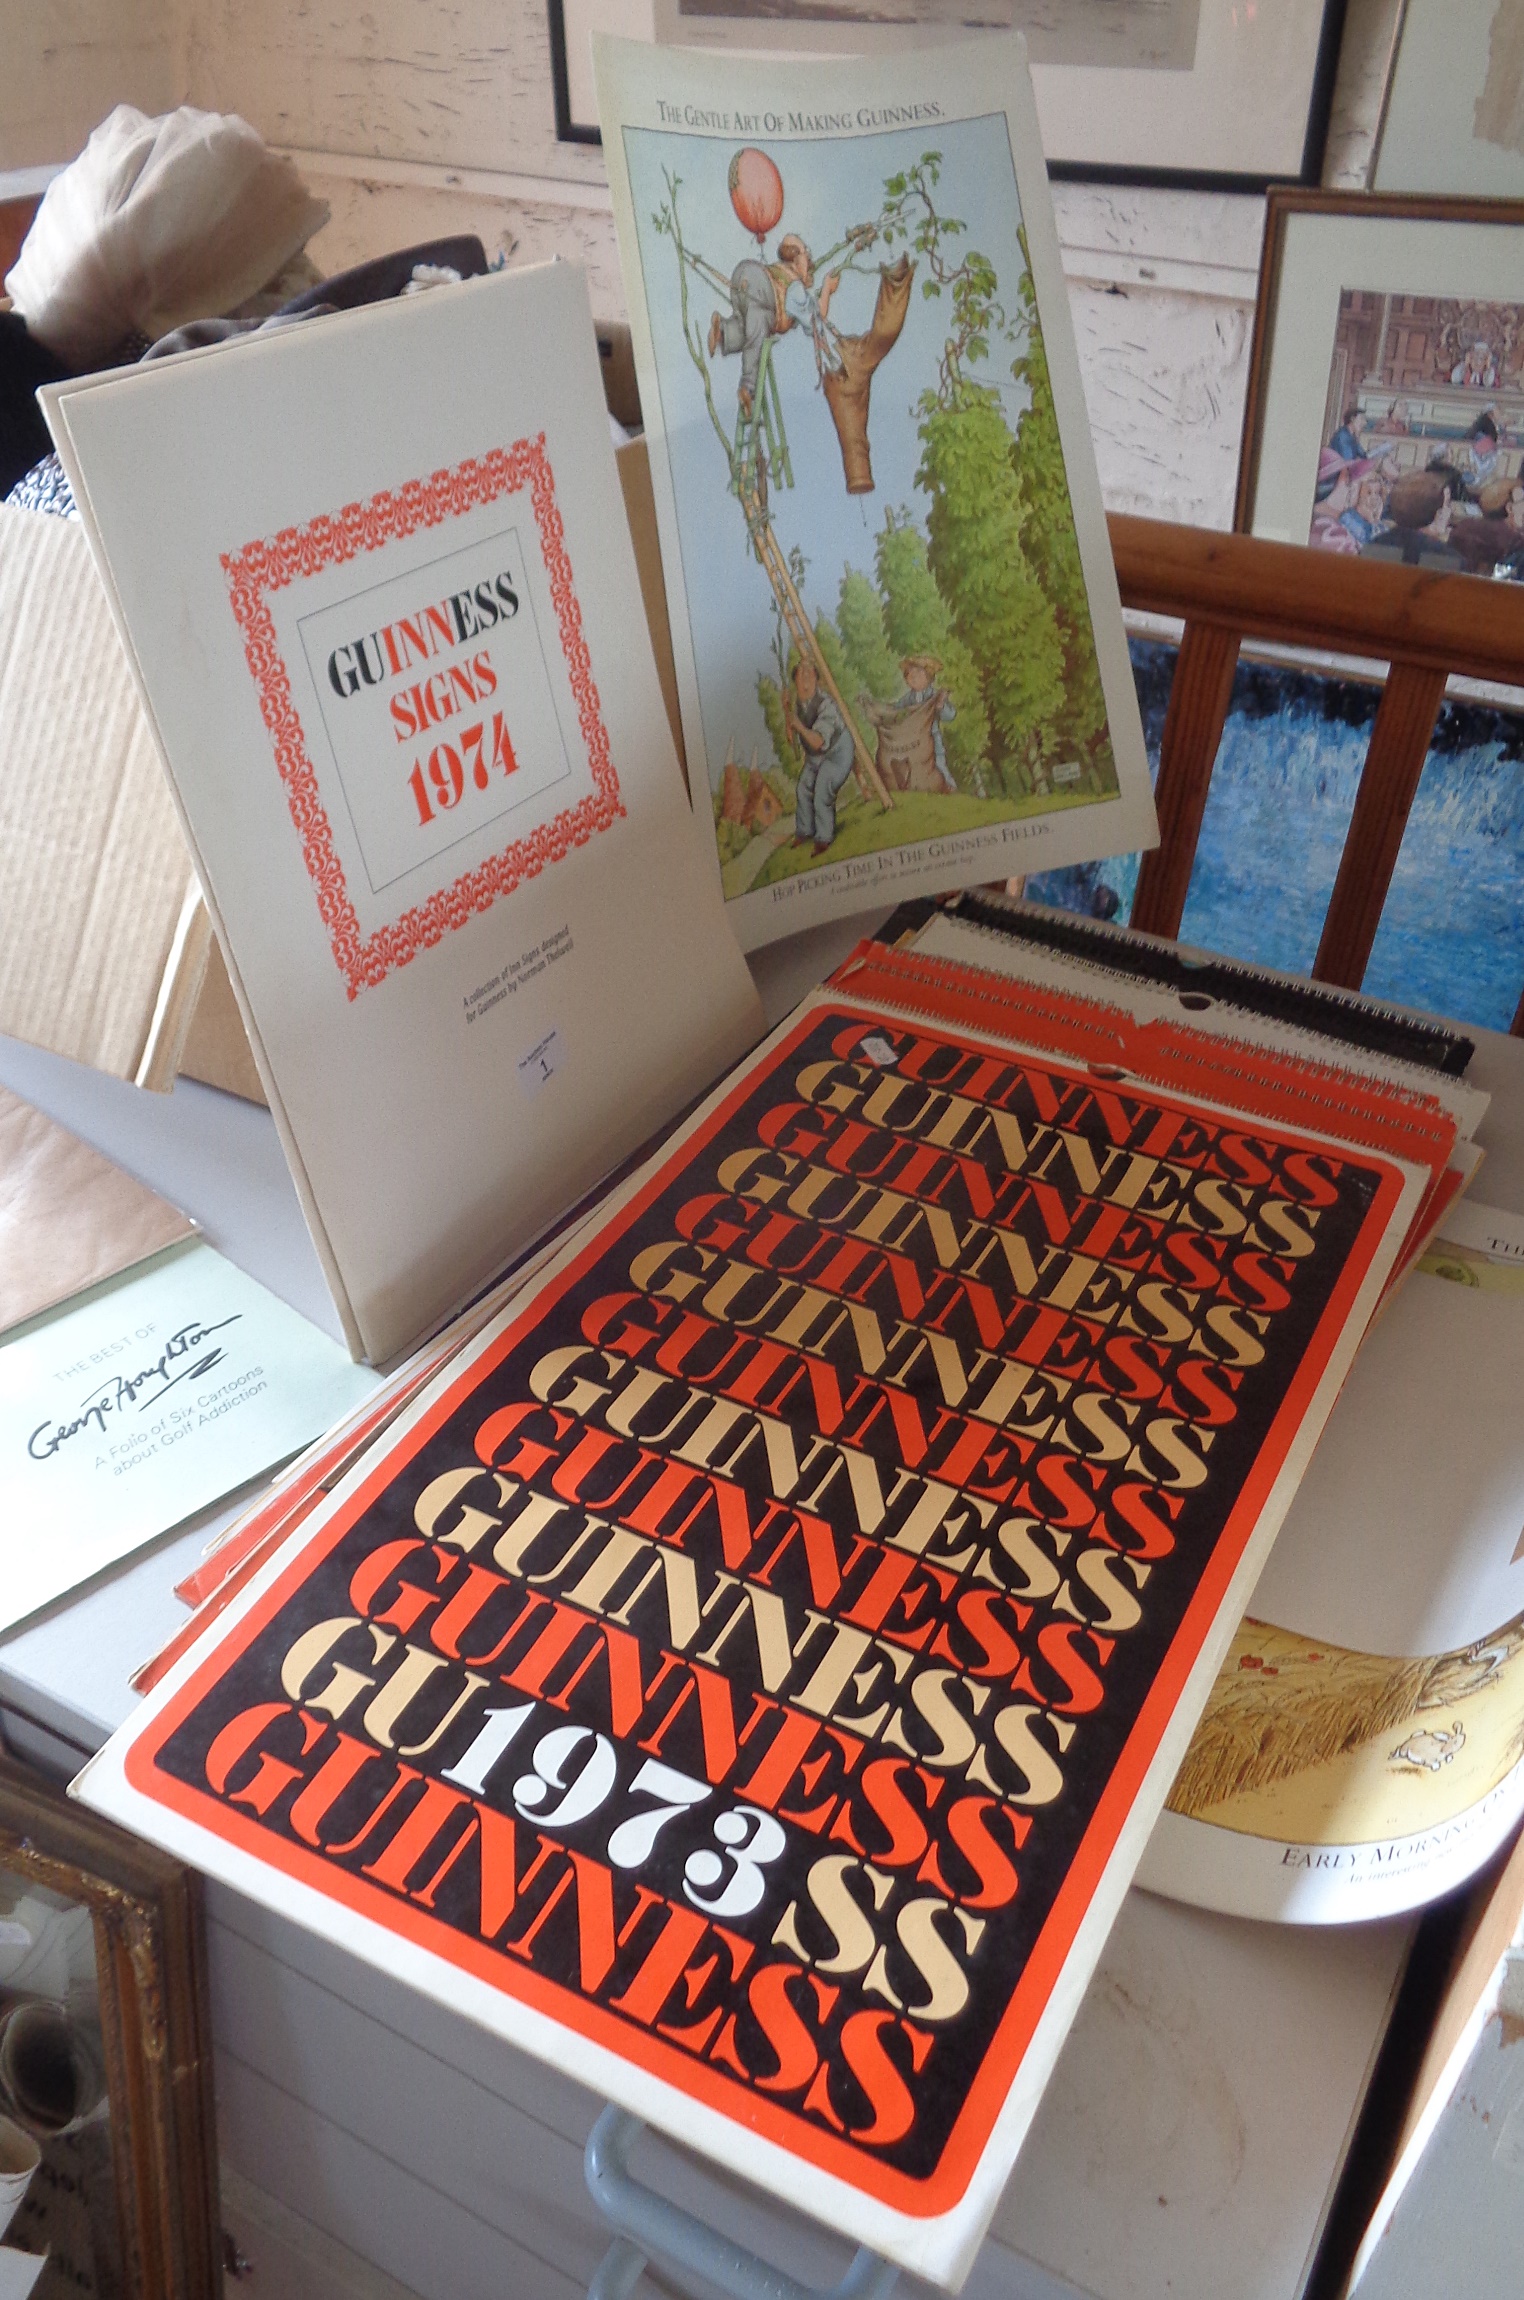 Folios of Guinness posters by Norman Thelwell and John Ireland, 13 Guinness calendars from the